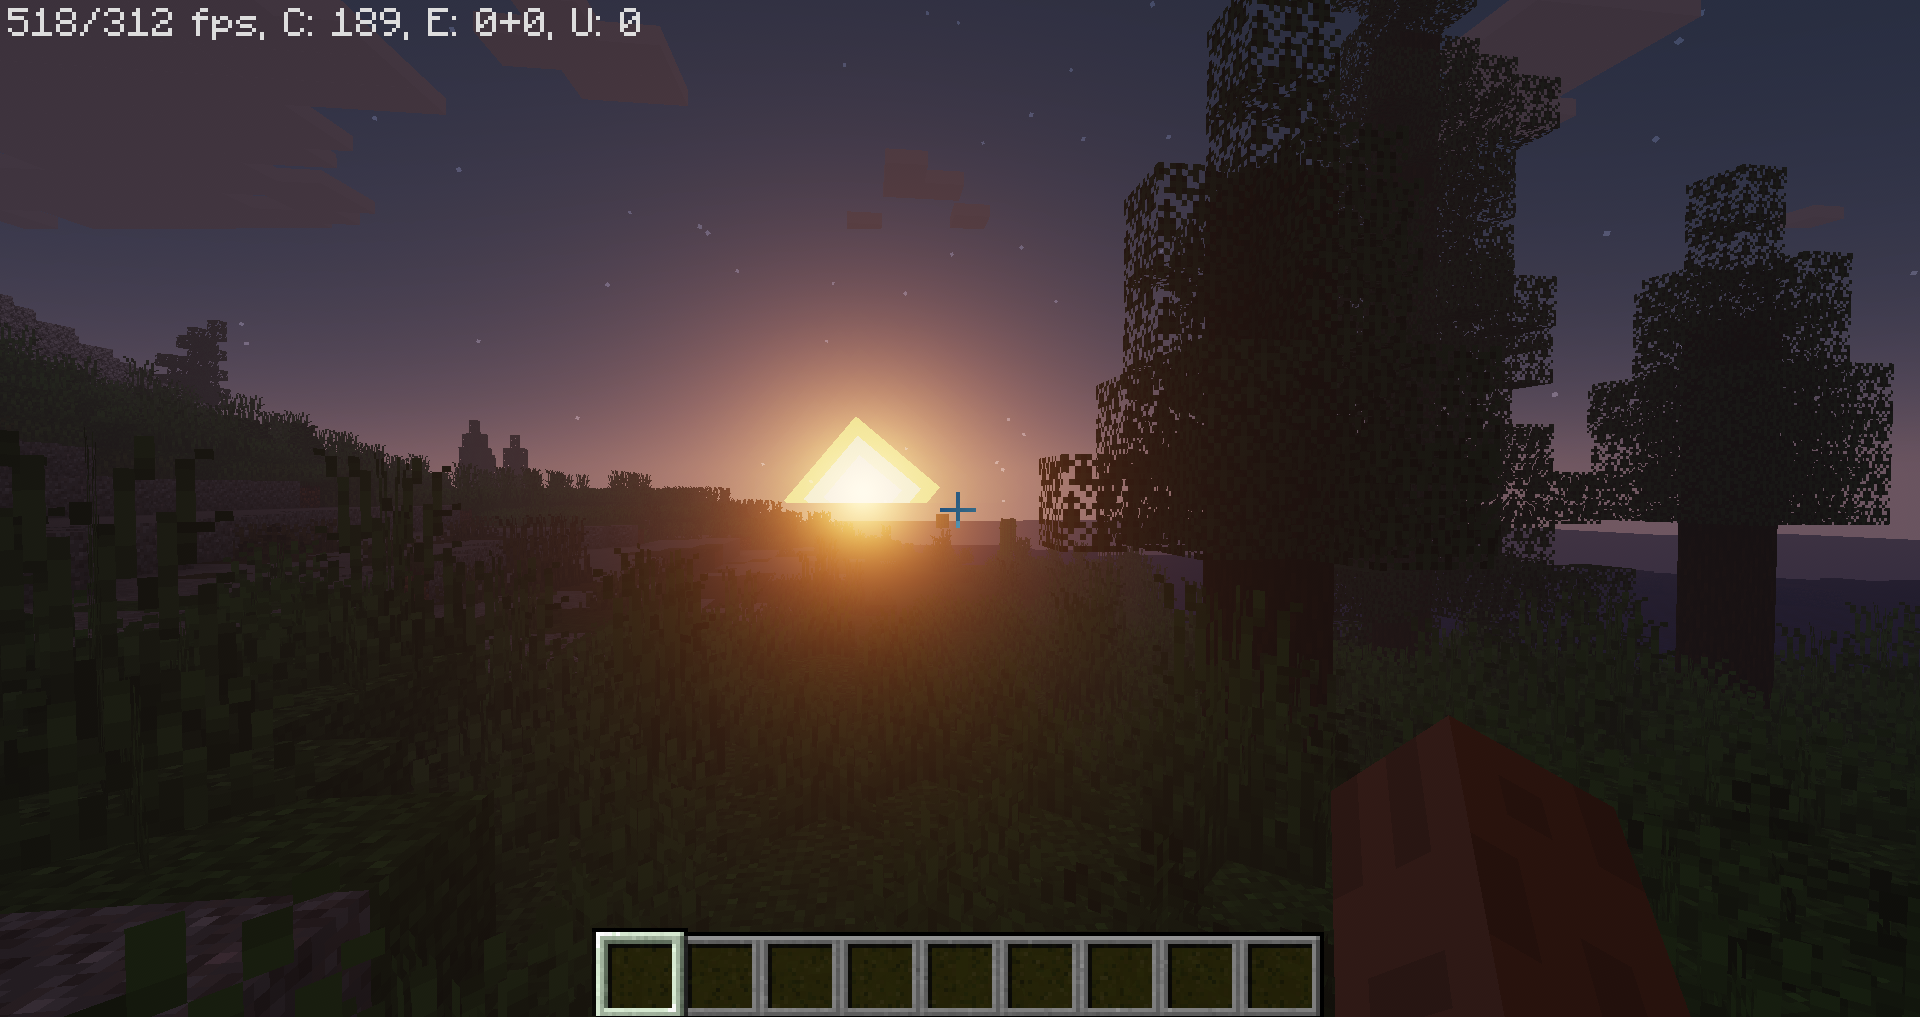 images/2406/14/Chocapic13_Shaders_4.png